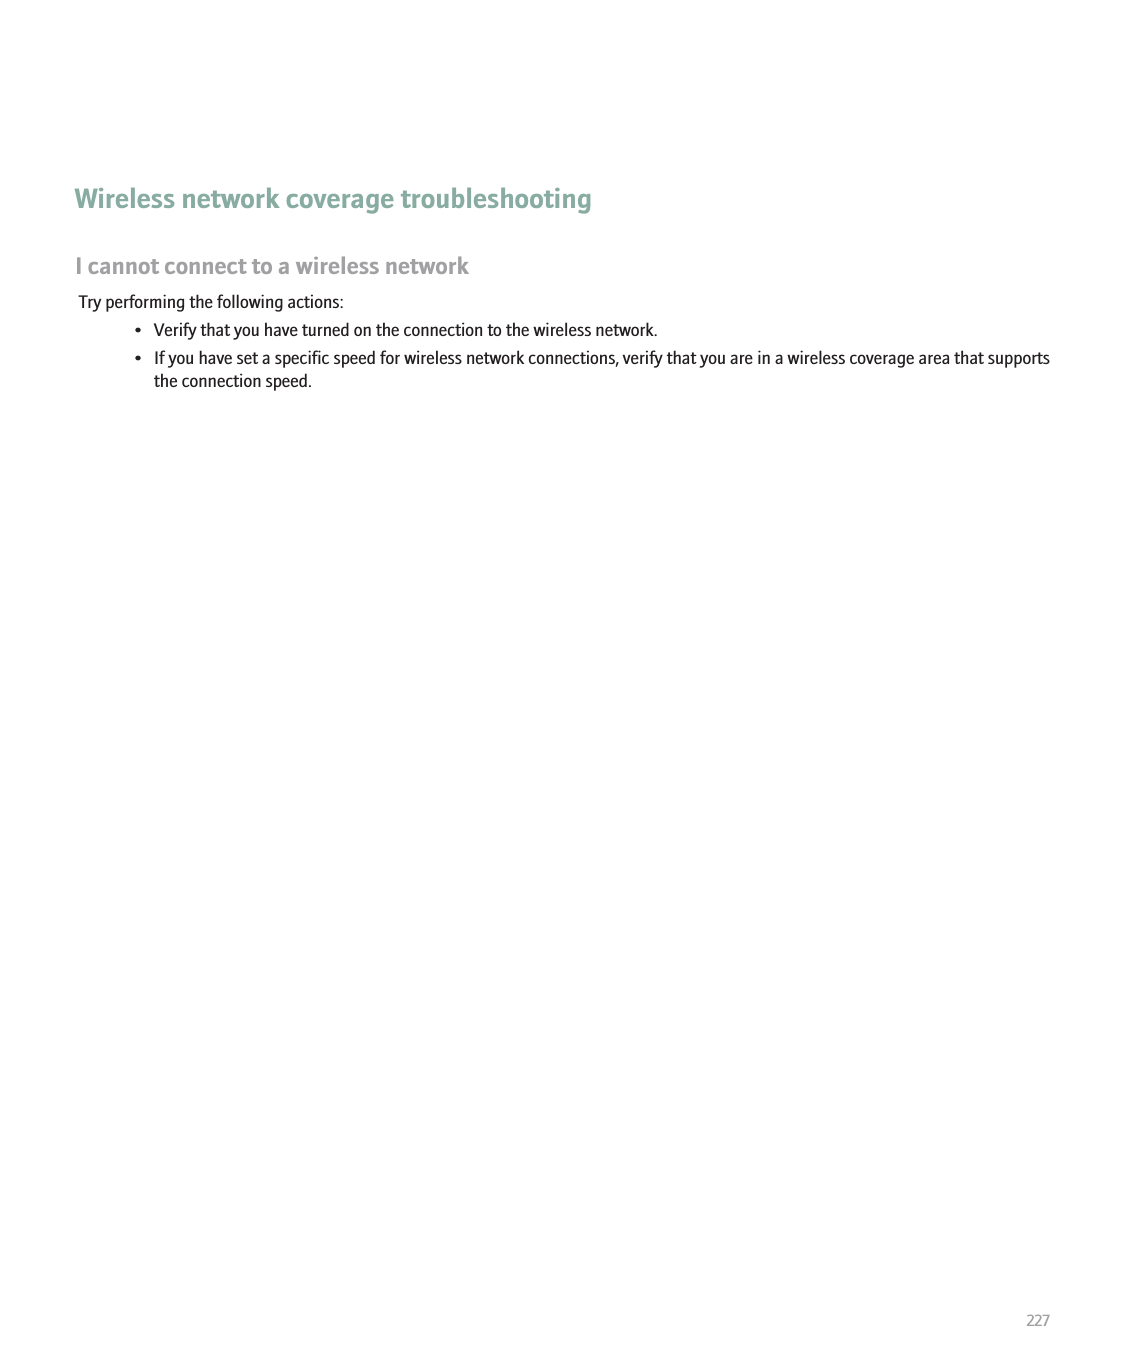 Wireless network coverage troubleshootingI cannot connect to a wireless networkTry performing the following actions:• Verify that you have turned on the connection to the wireless network.• If you have set a specific speed for wireless network connections, verify that you are in a wireless coverage area that supportsthe connection speed.227